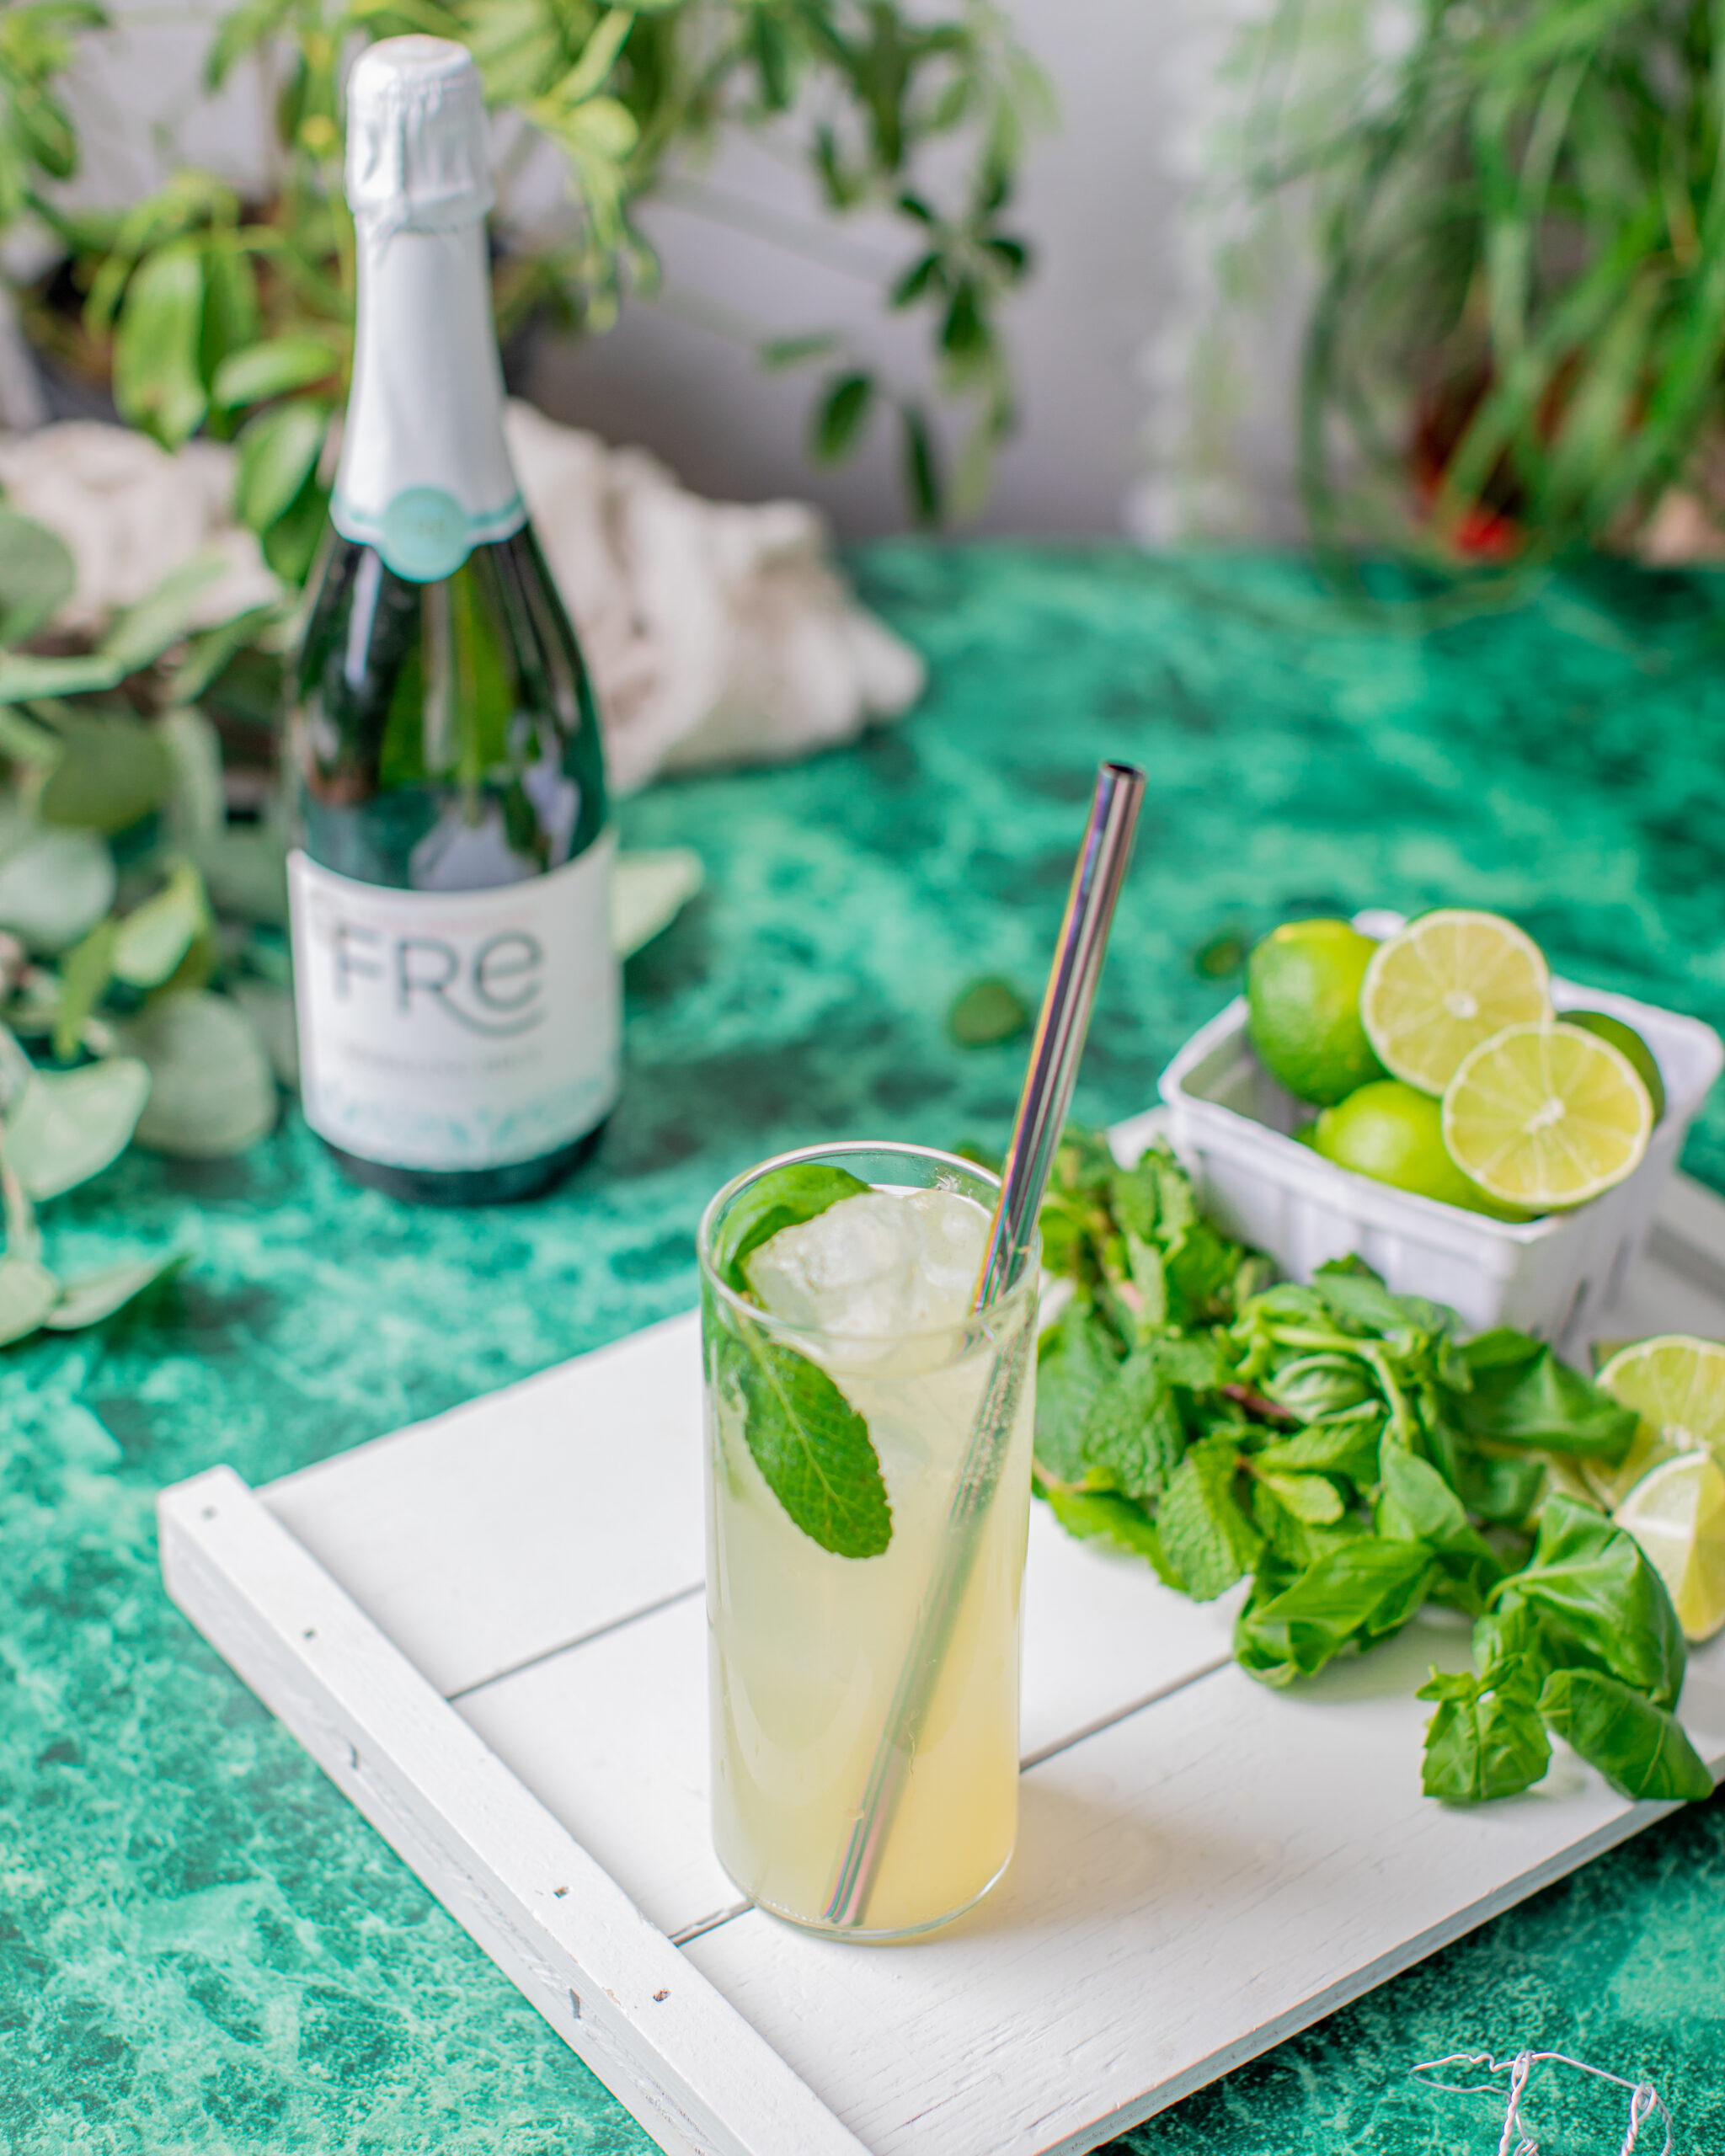 Mojito cocktail, mojito mocktail, mocktail, sober, fre, free wines, fre wines, alcohol free wine, alcohol removed wine, alcohol free champagne, alcohol free bubbly